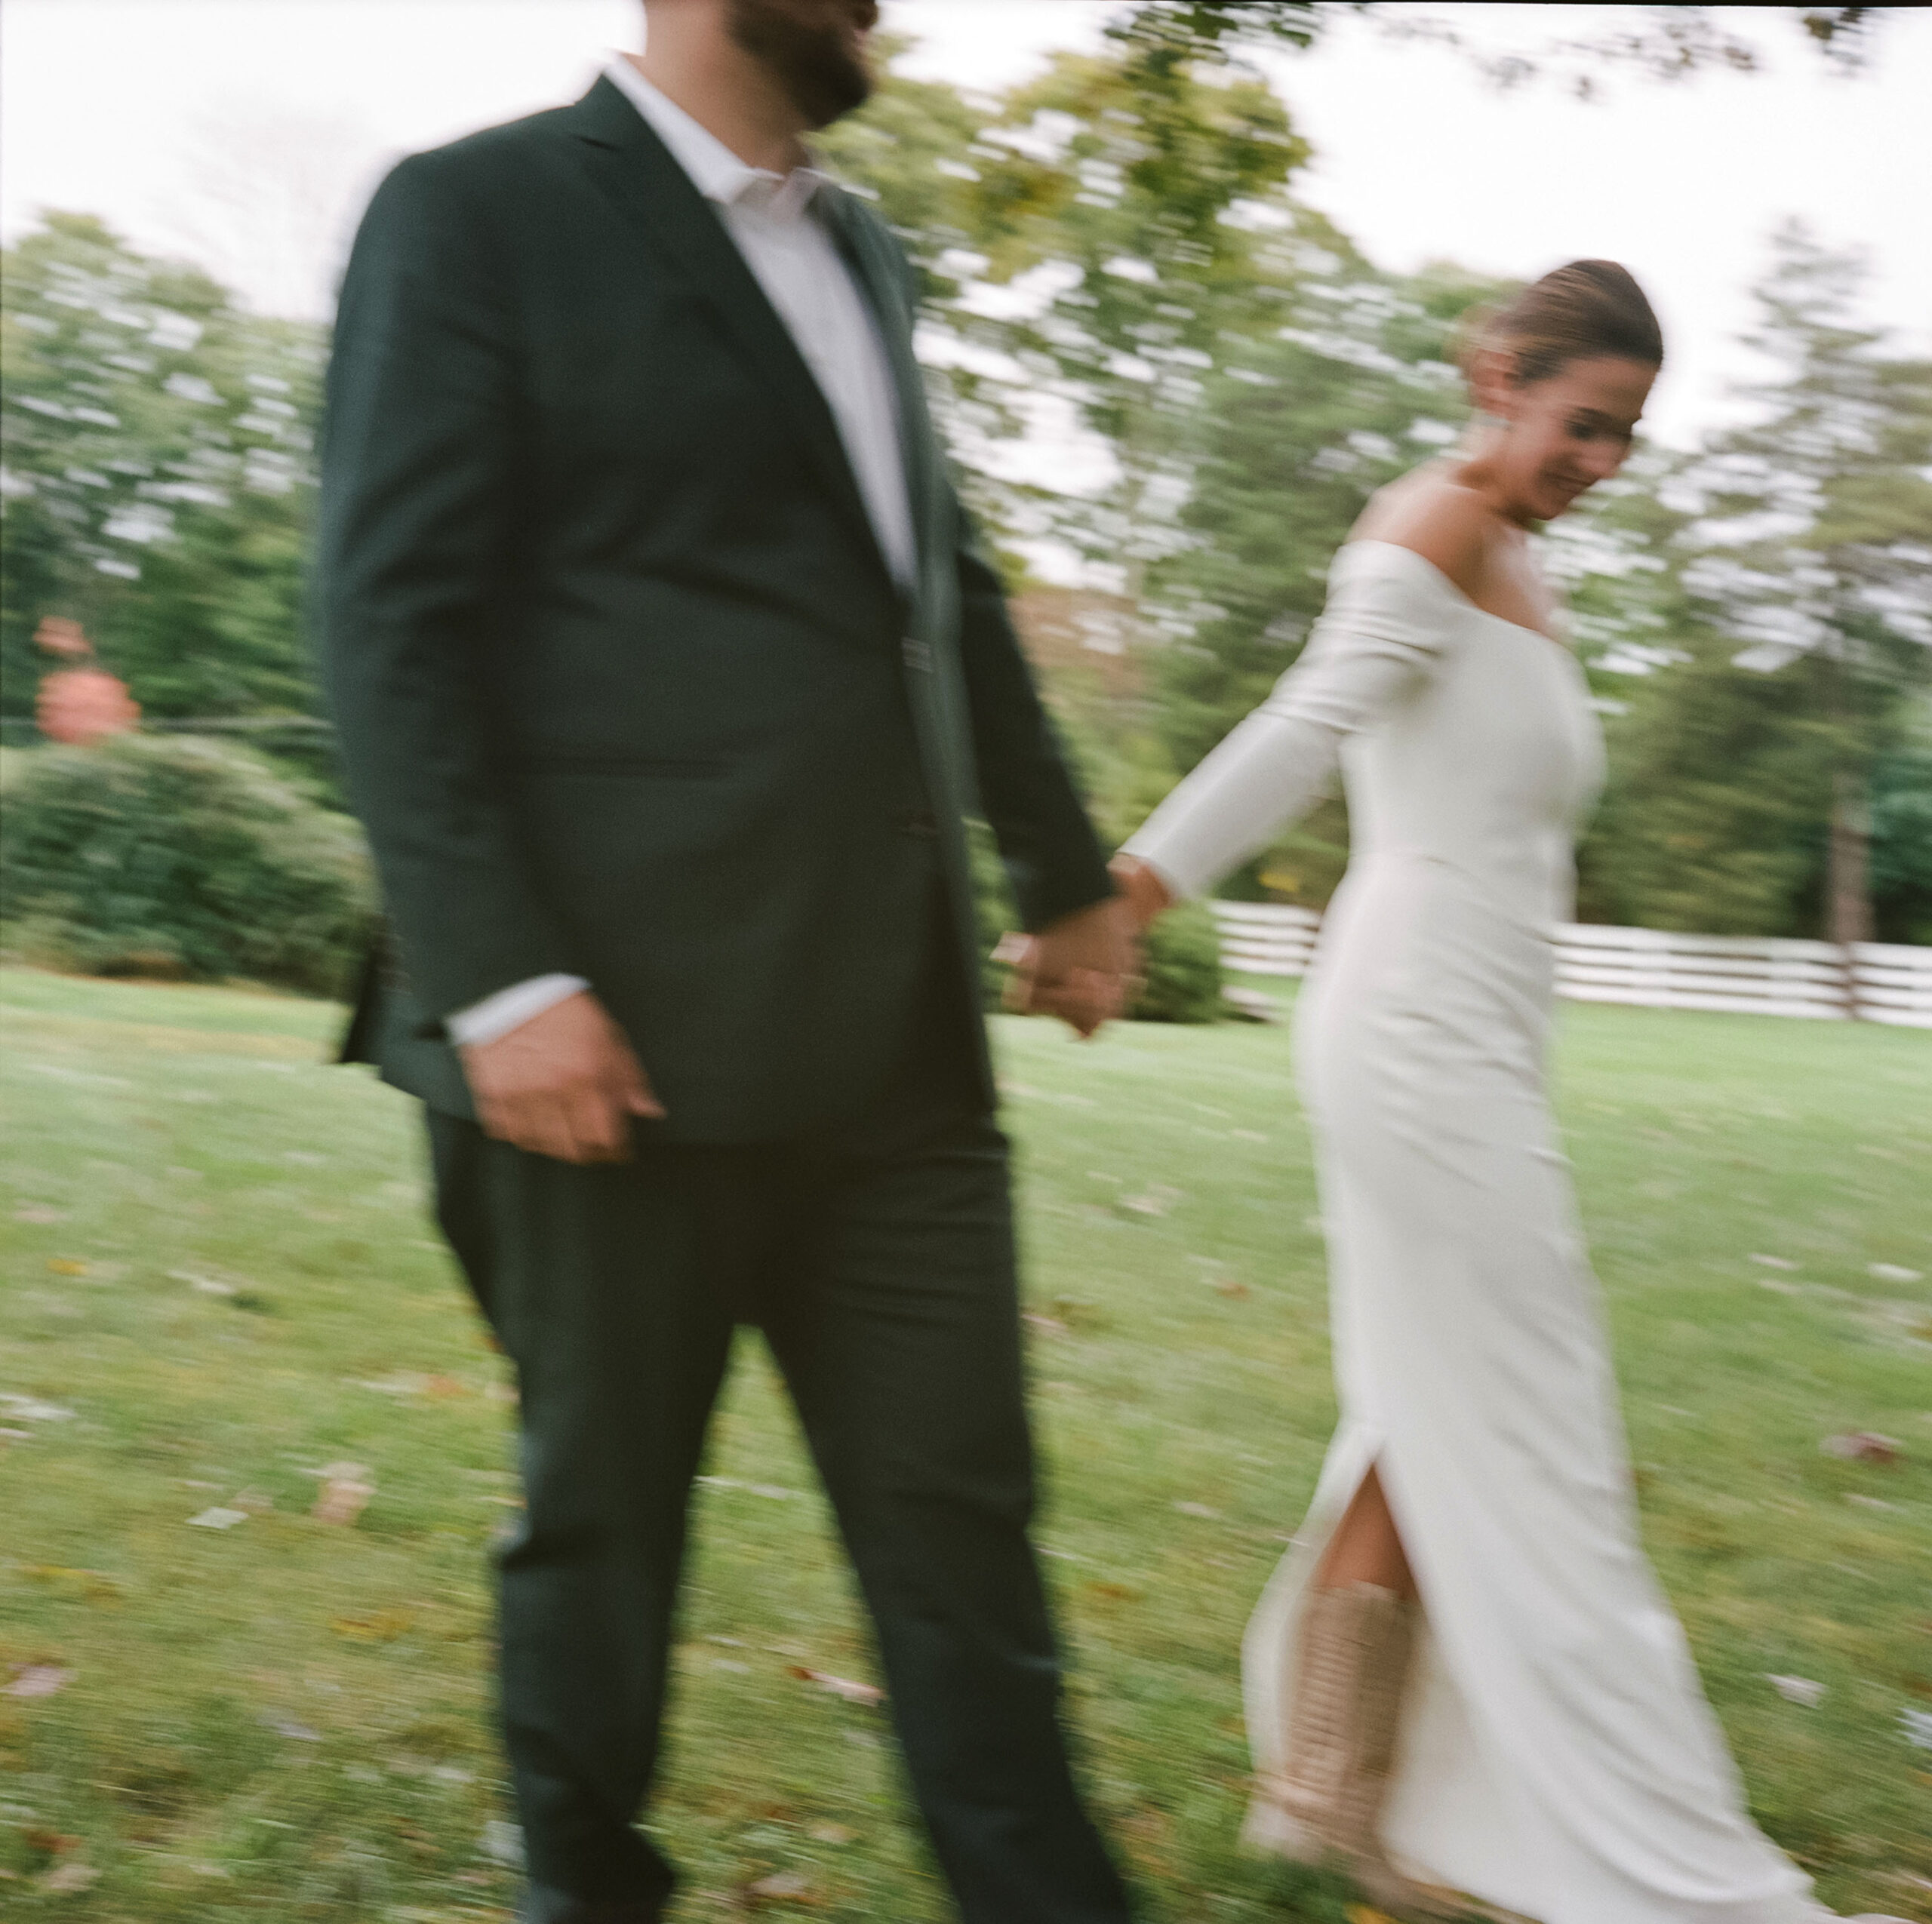 blurry color photo on medium format film of a bride and groom holding hands and walking after their wedding ceremony at Chimney Hill Estate Inn in Lambertville, NJ